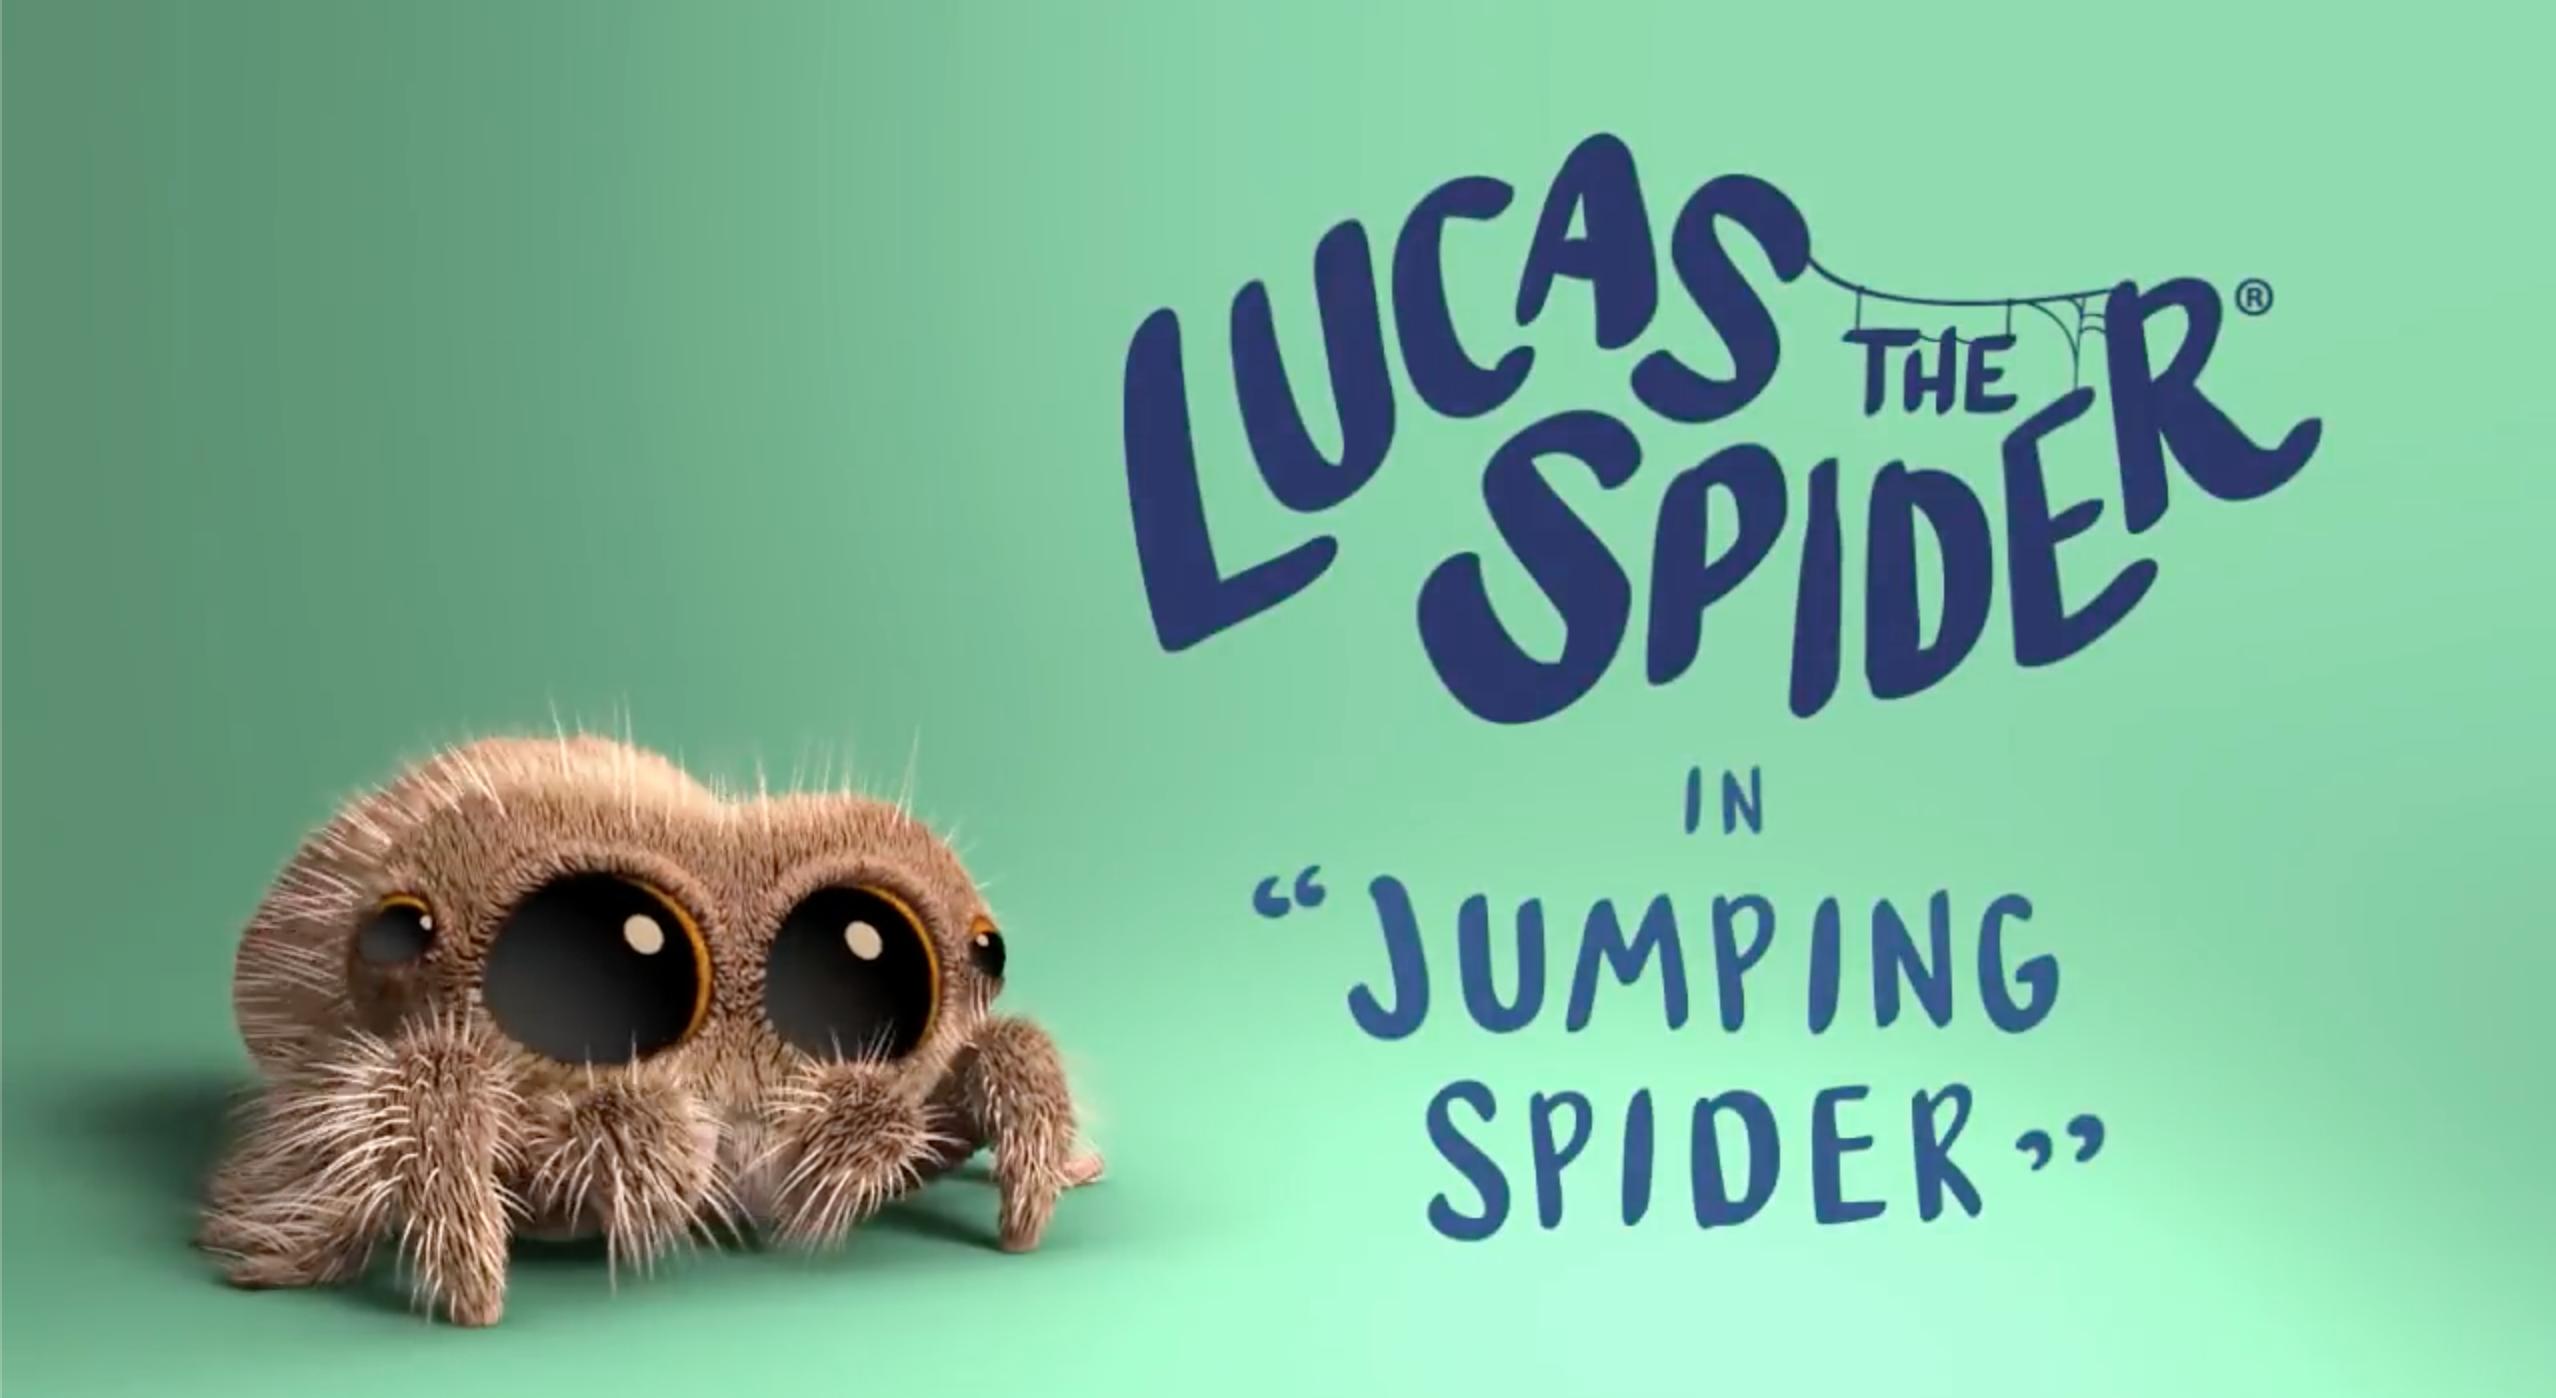 Lucas the Spider (TV Series 2017– )